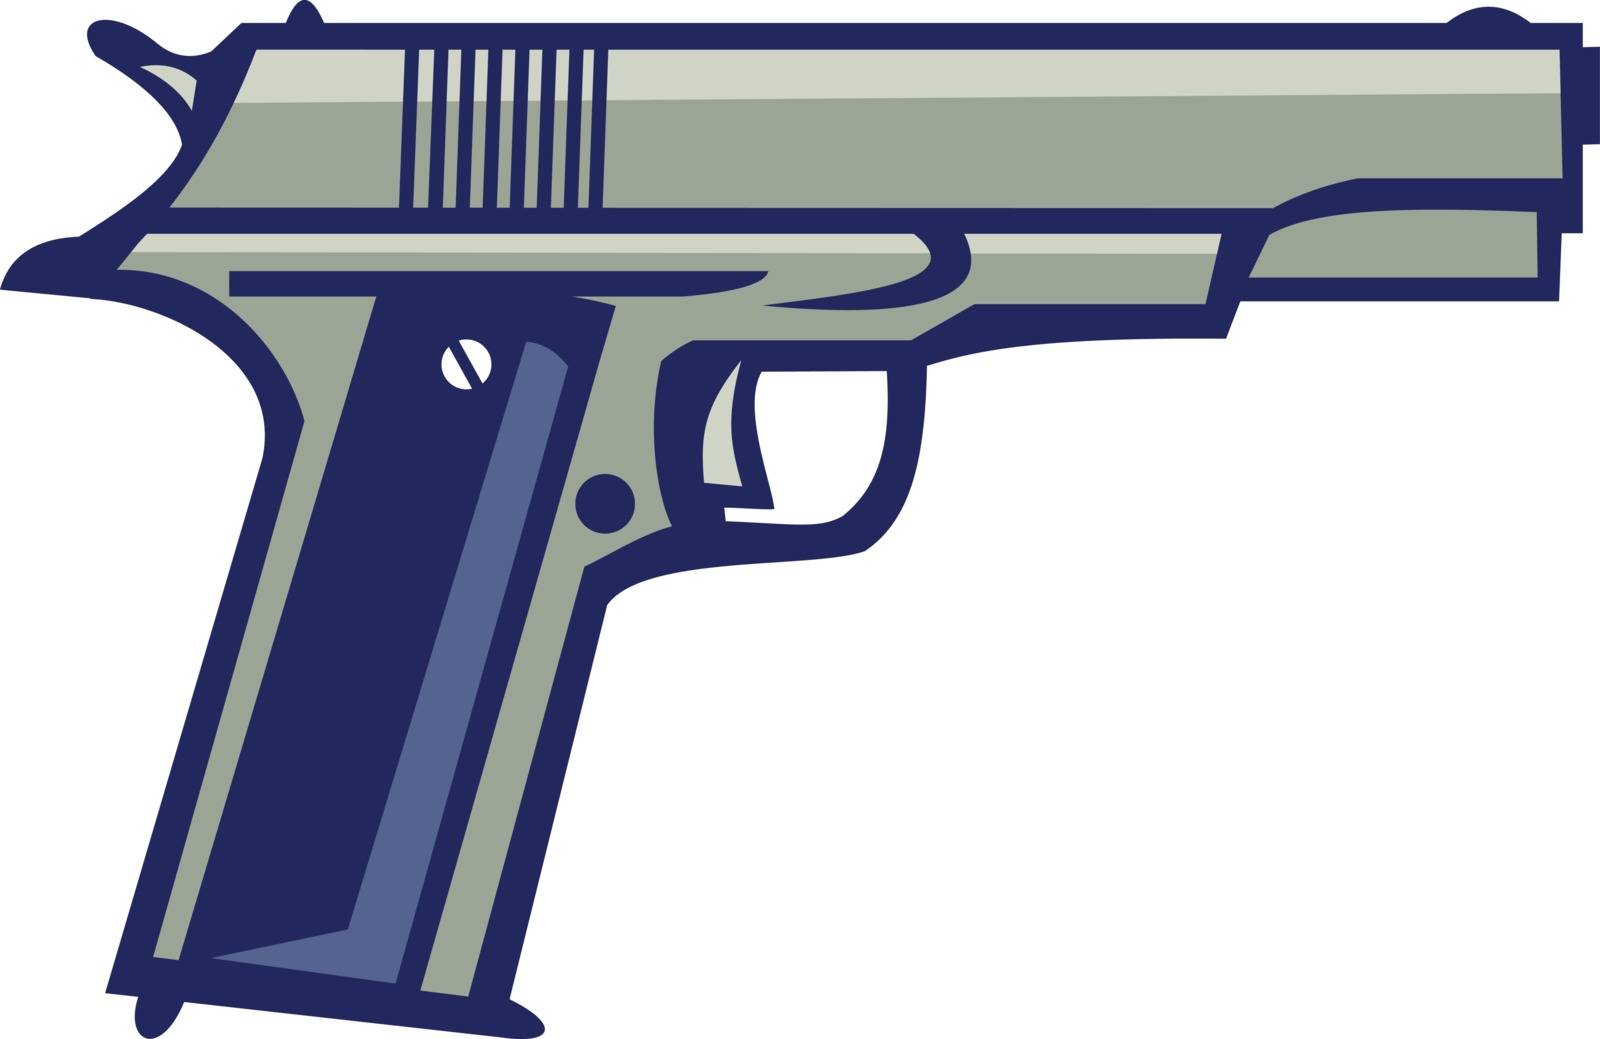 Illustration of a 1911 single-action, semi-automatic, magazine-fed, recoil-operated sidearm pistol chambered for the .45 caliber ACP cartridge viewed from side on isolated white background done in retro style. 